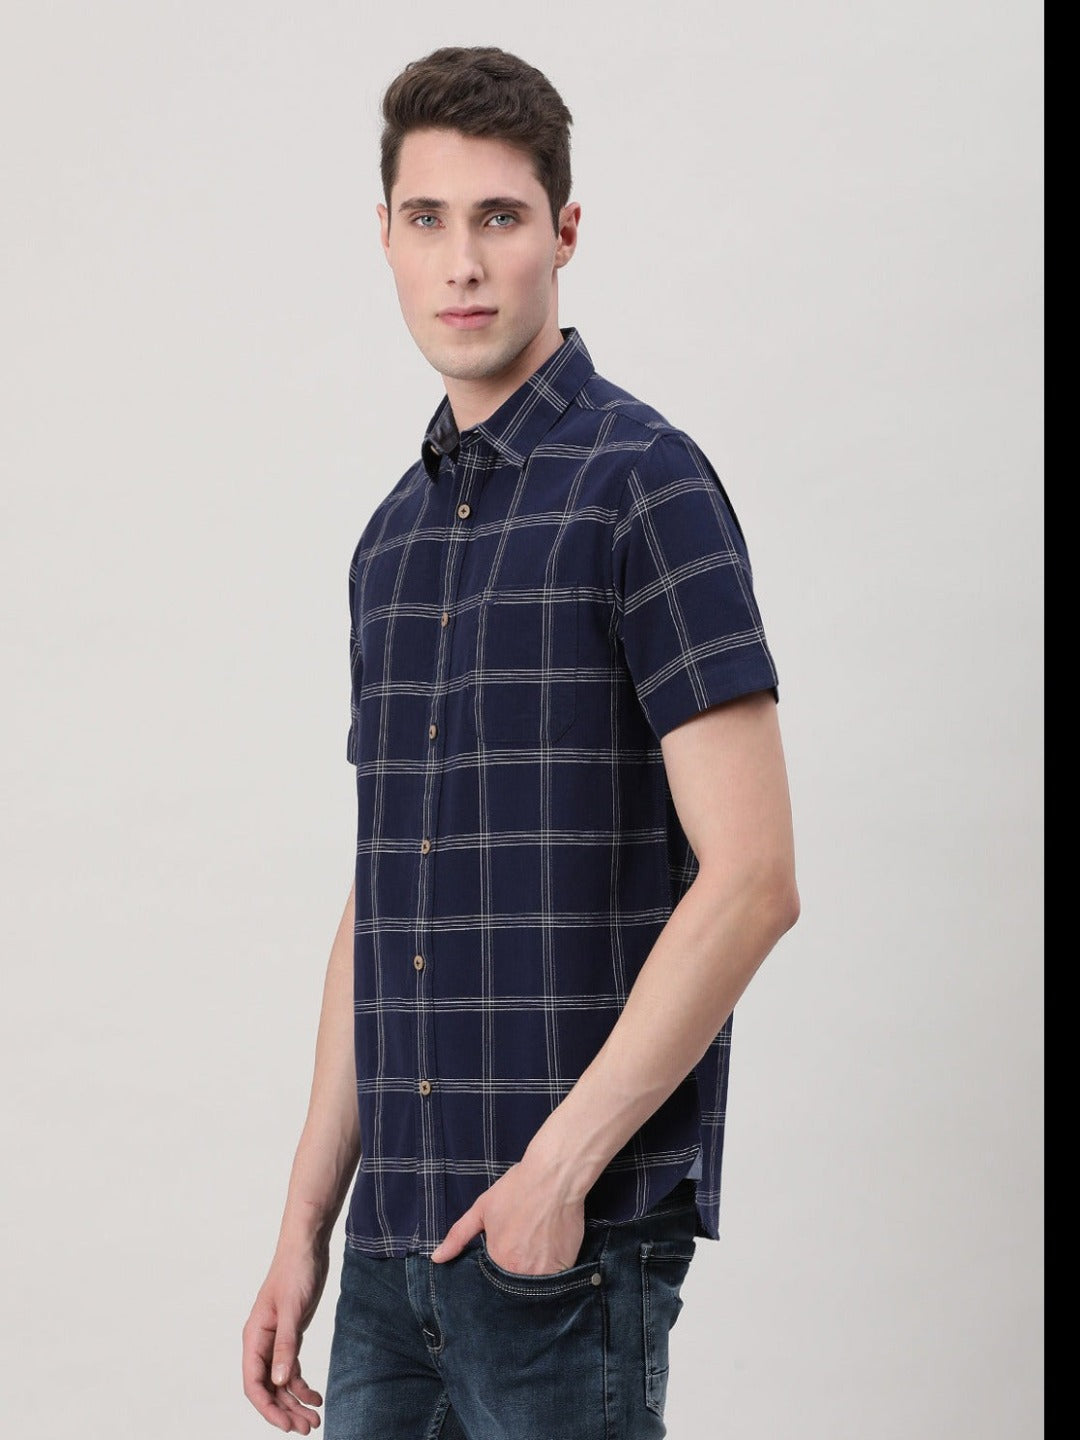 Casual Navy Half Sleeve Comfort Fit Checks Shirt with Collar for Men